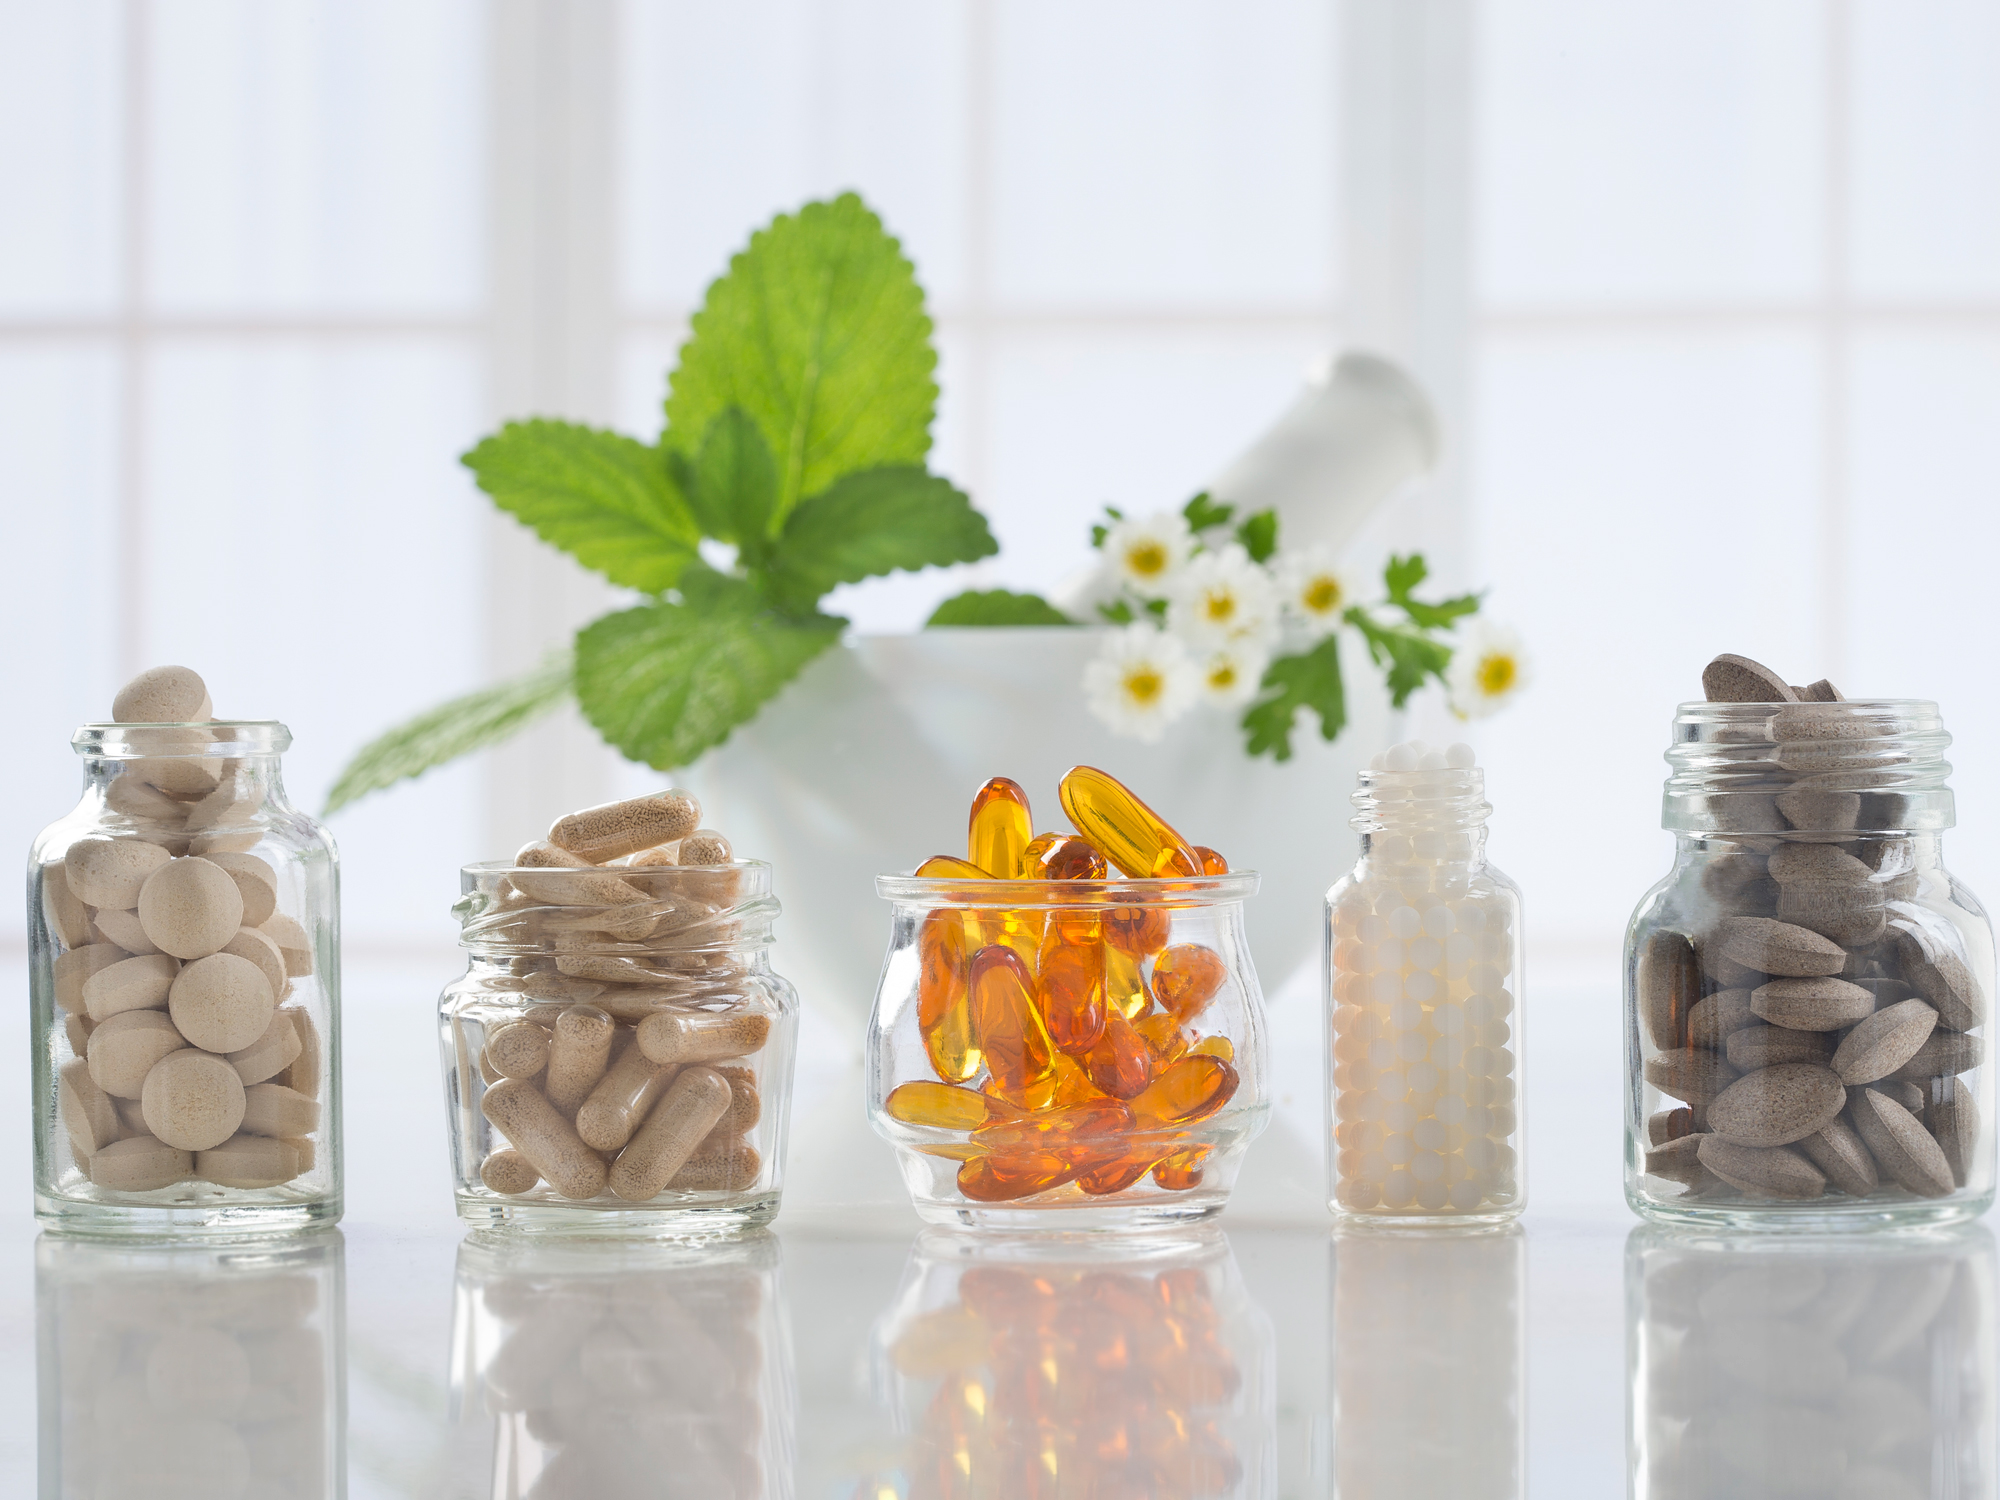 Do we really need vitamin supplements?